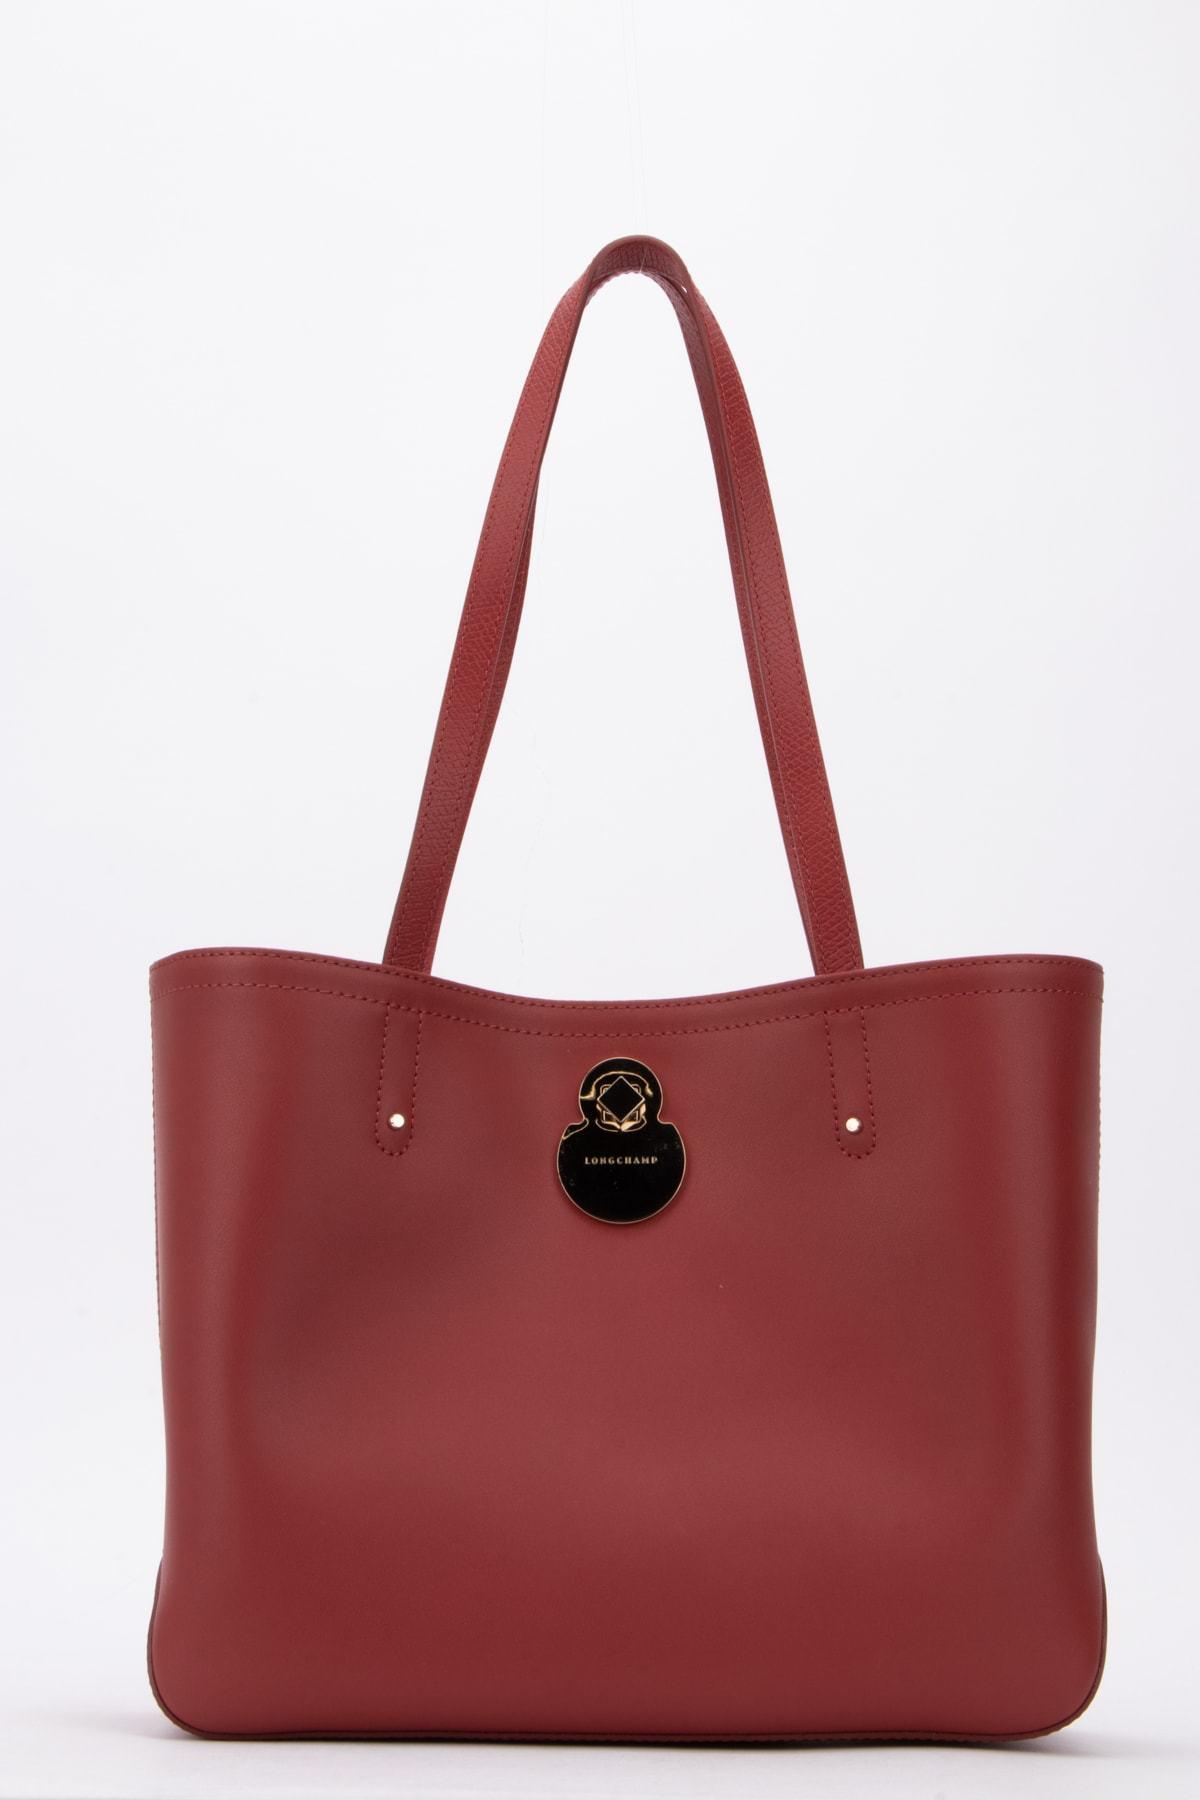 Longchamp Leather Cavalcade Small Tote Bag in Red - Lyst